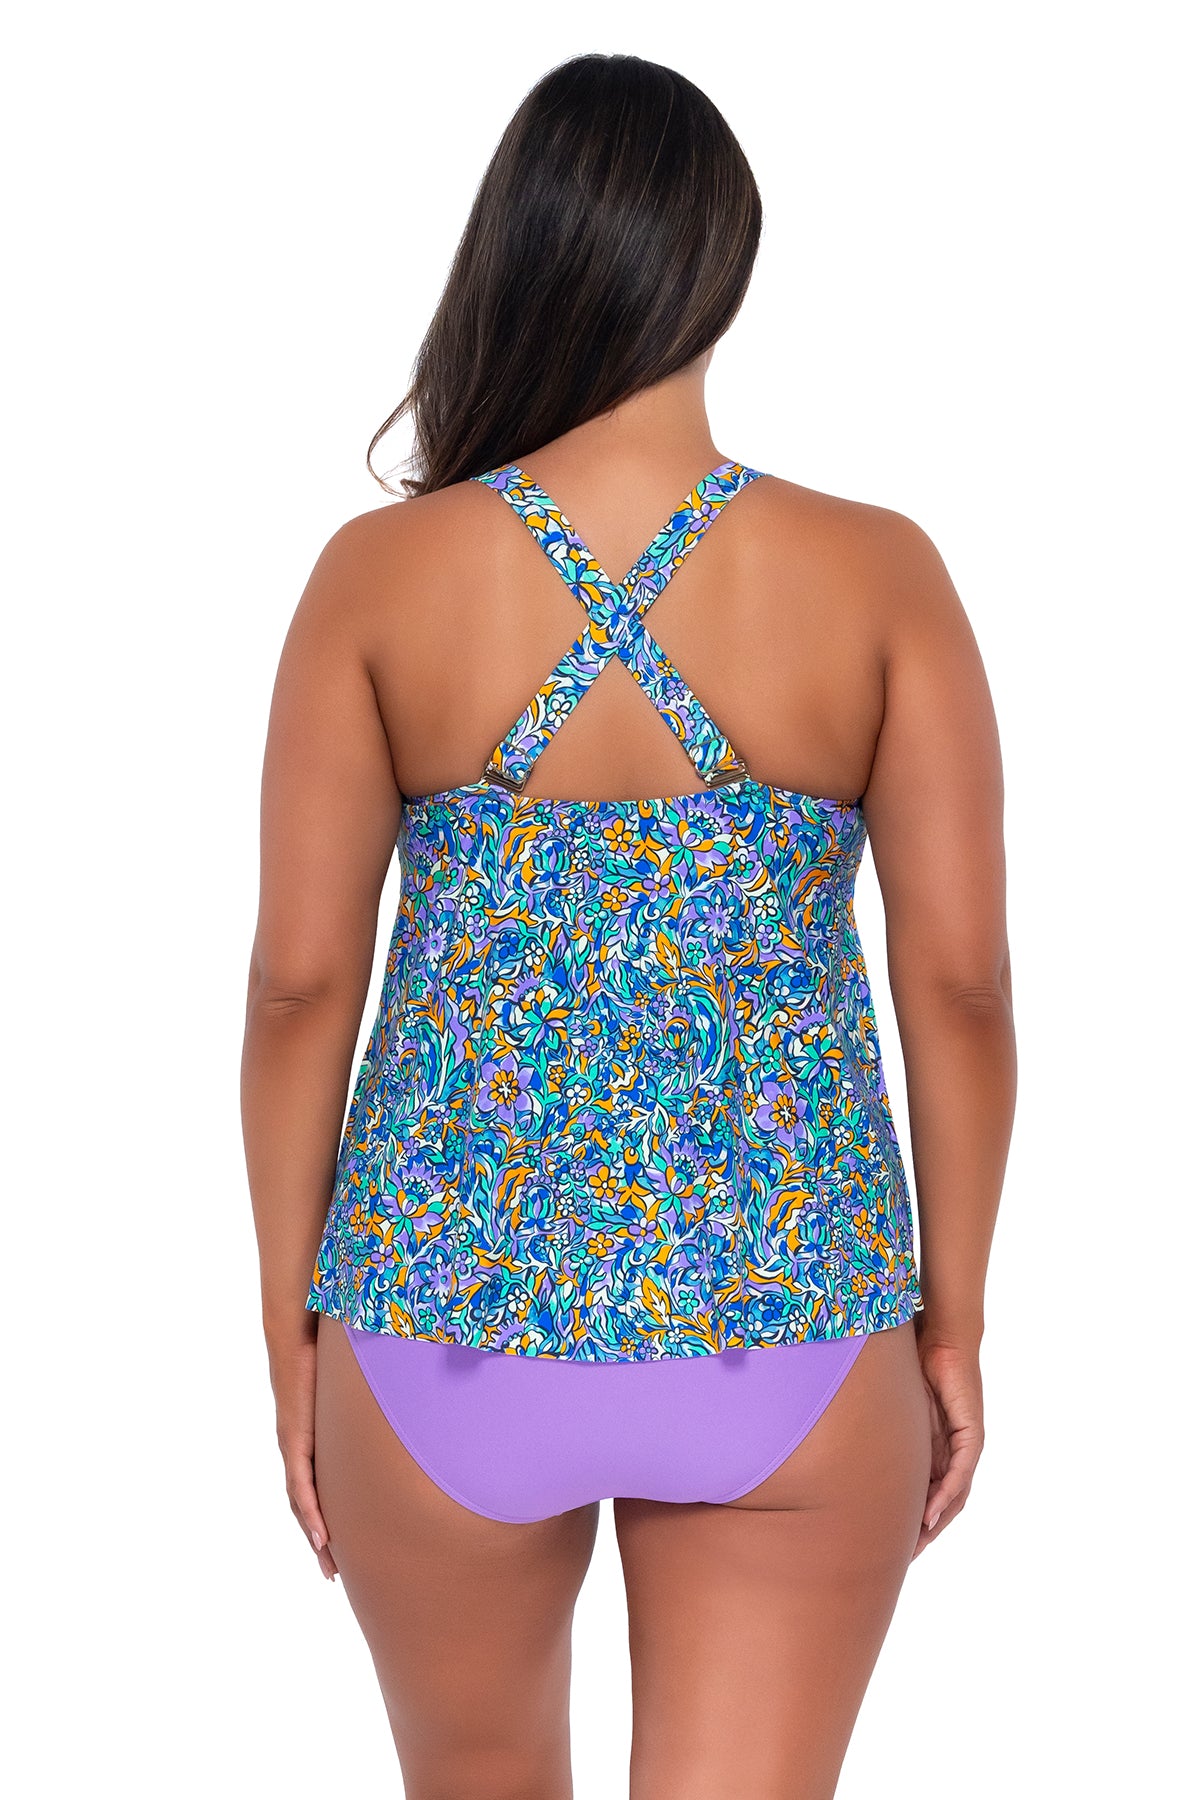 Back pose #1 of Nicky wearing Sunsets Escape Pansy Fields Sadie Tankini Top showing crossback straps with matching Hannah High Waist bikini bottom